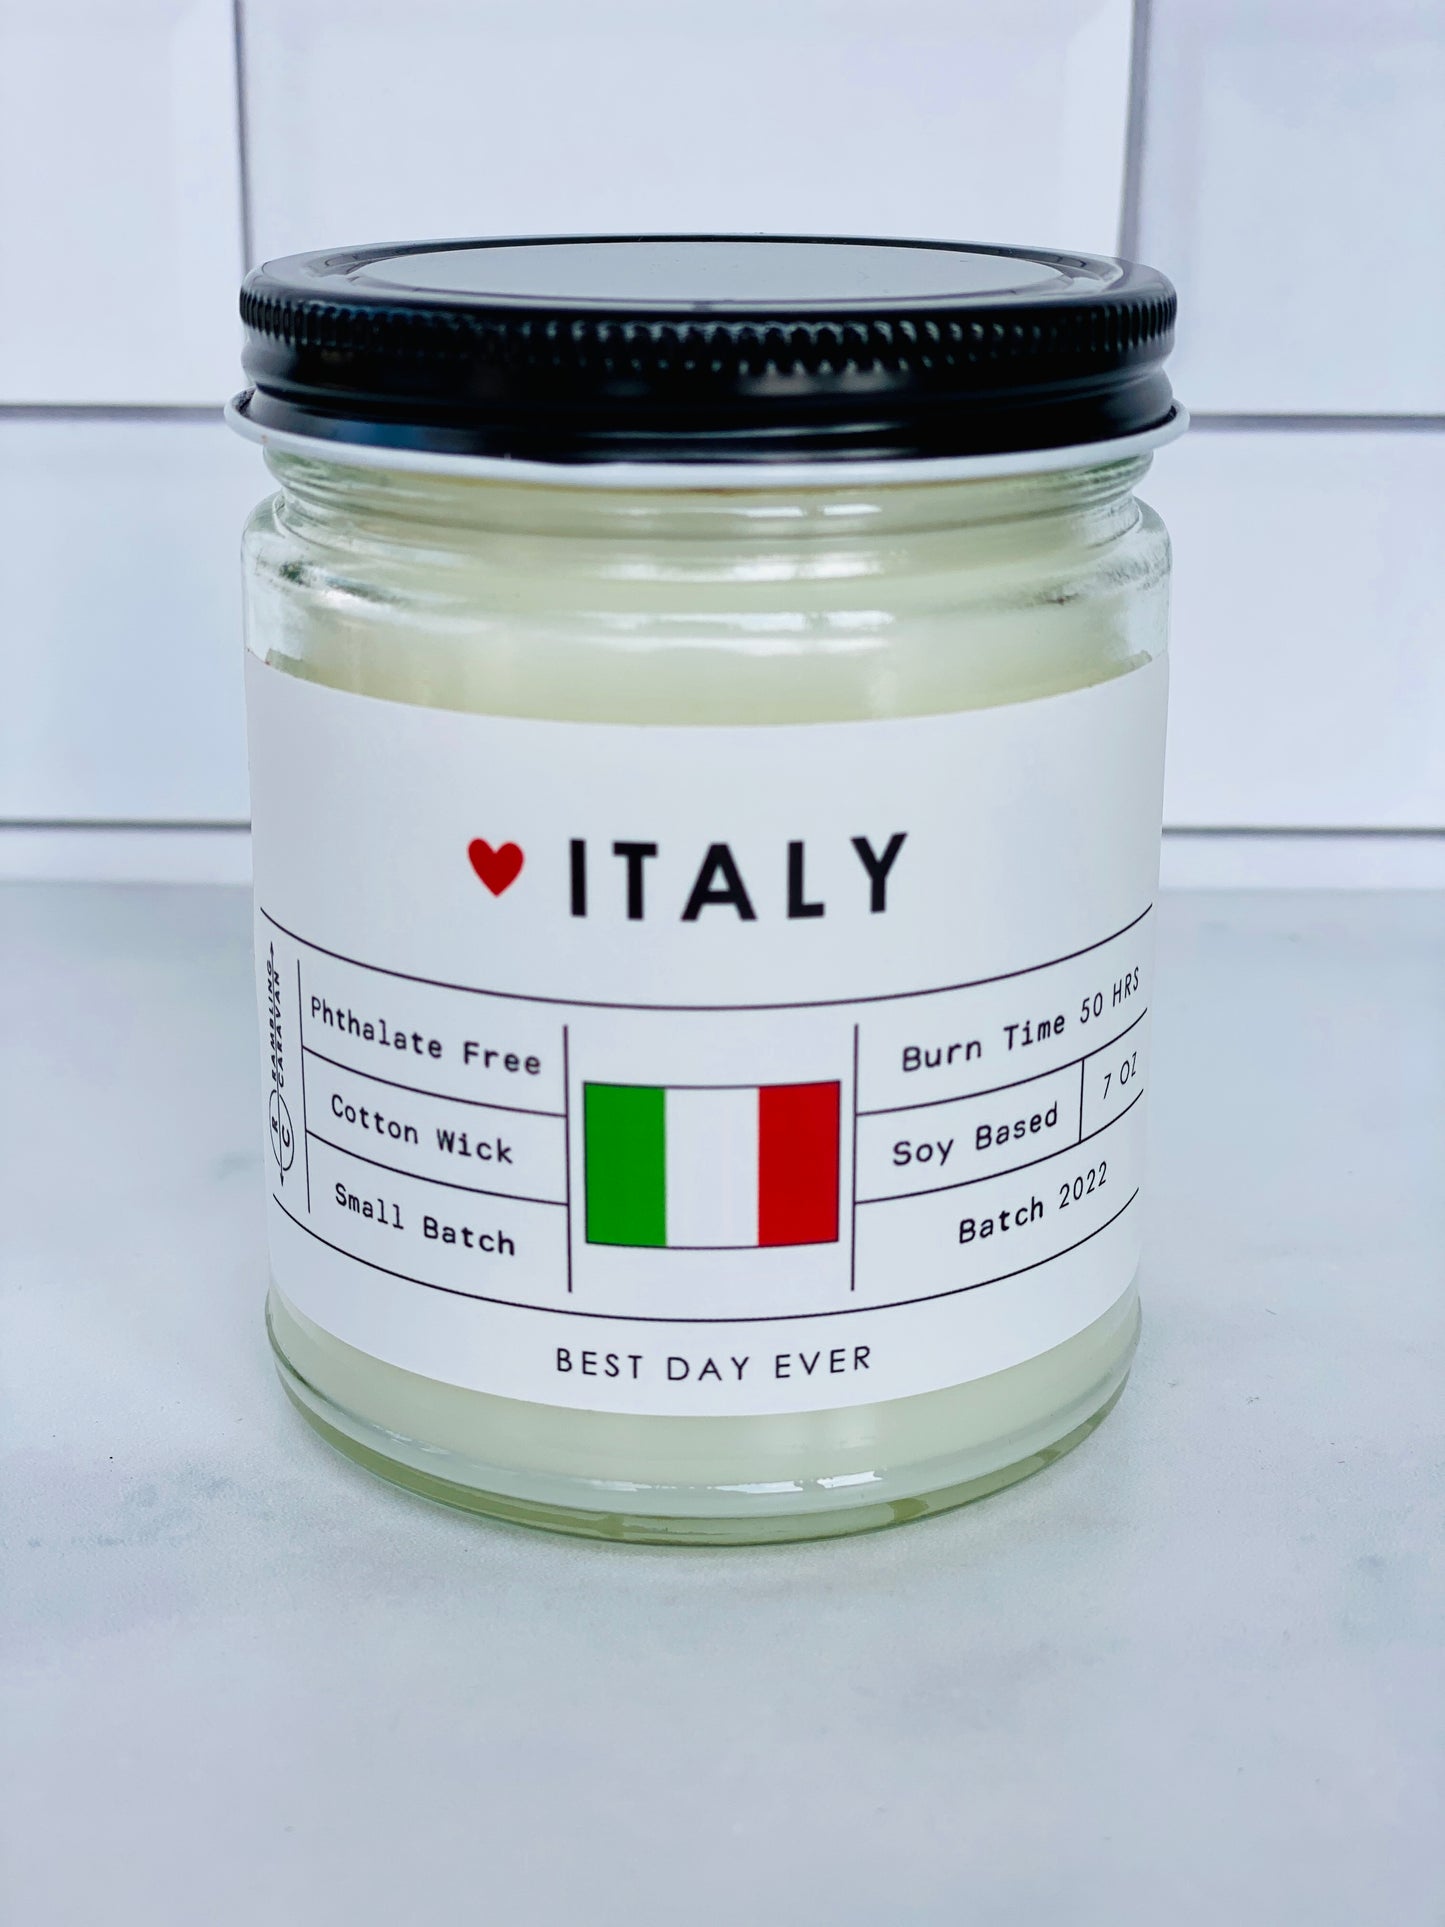 Italy Candle